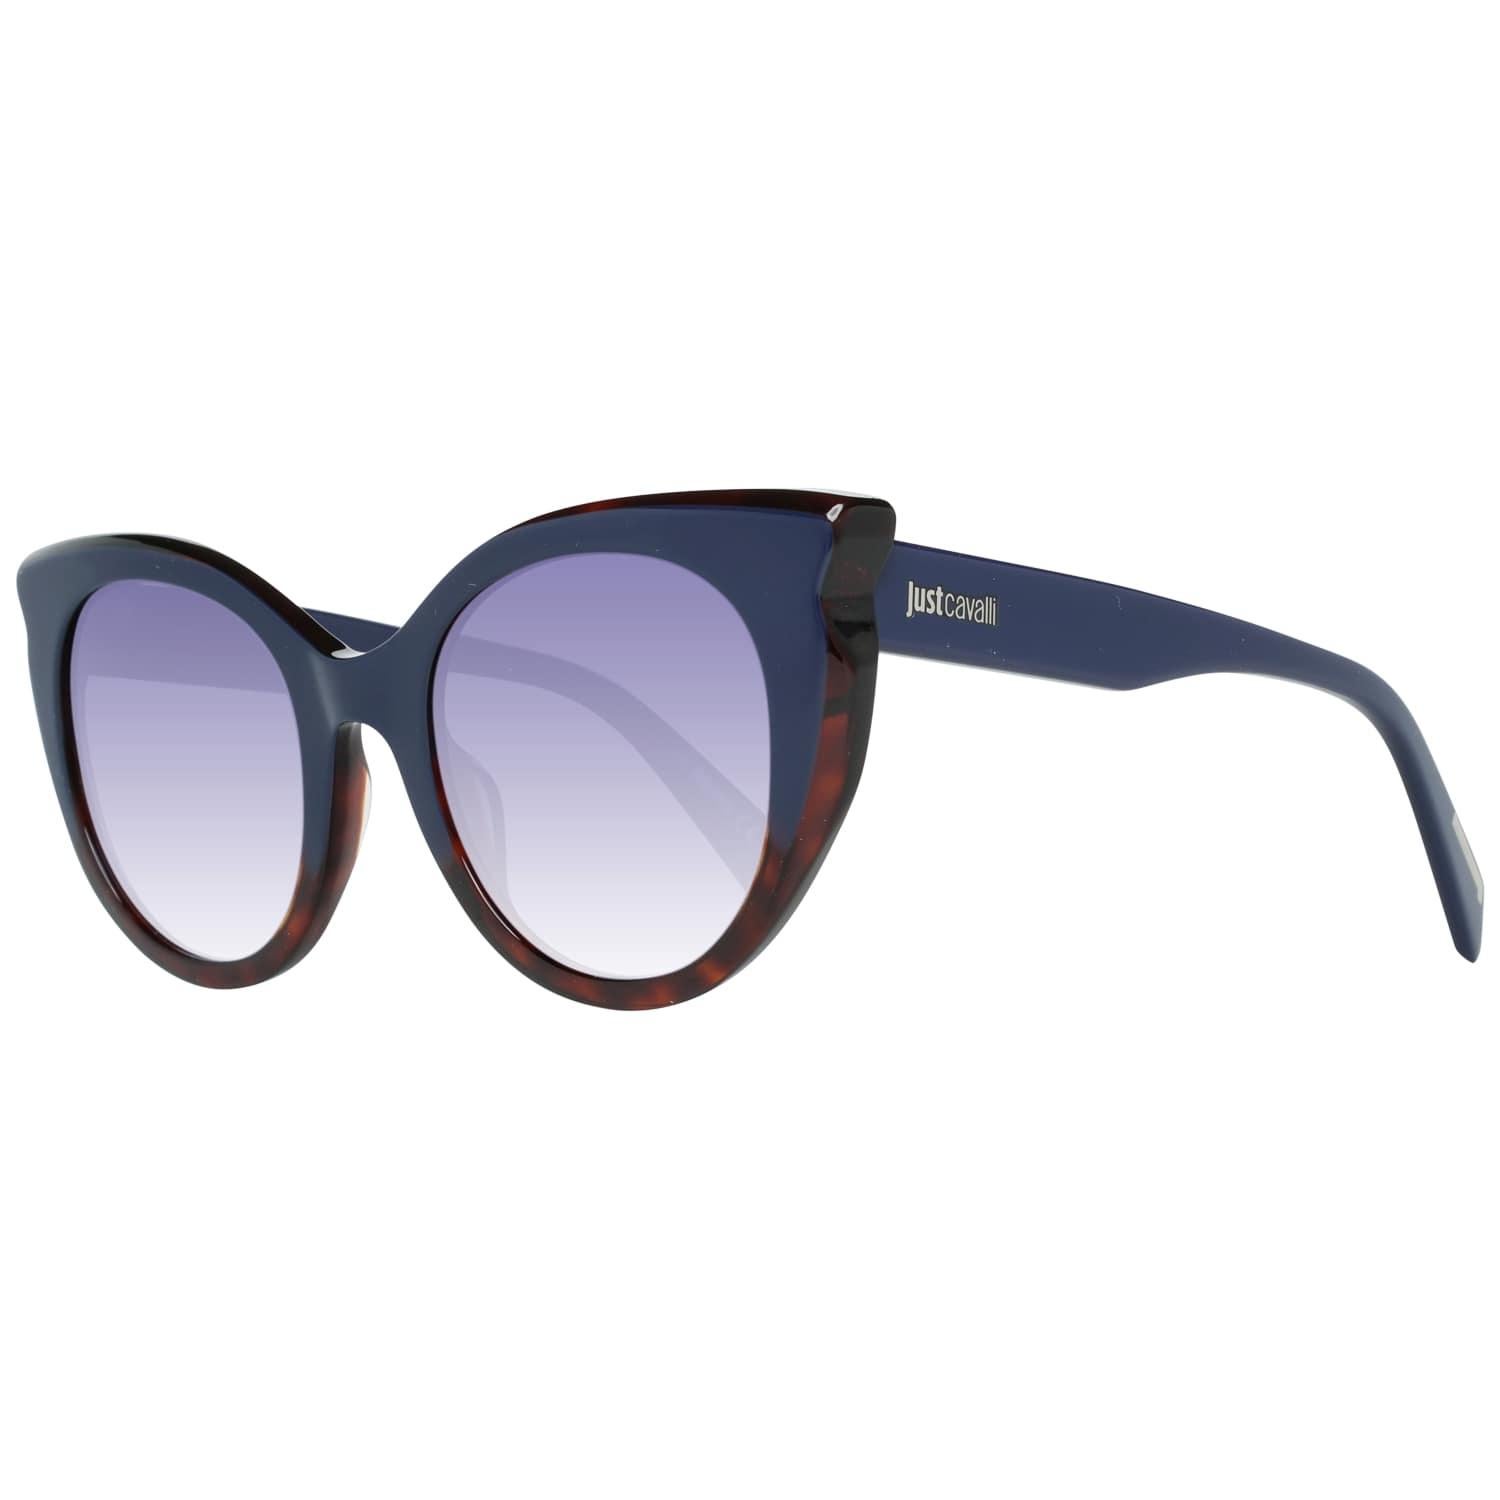 Details
MATERIAL: Acetate
COLOR: Blue
MODEL: JC786S 5392W
GENDER: Women
COUNTRY OF MANUFACTURE: China
TYPE: Sunglasses
ORIGINAL CASE?: Yes
STYLE: Oval
OCCASION: Casual
FEATURES: Lightweight
LENS COLOR: Blue
LENS TECHNOLOGY: Gradient
YEAR